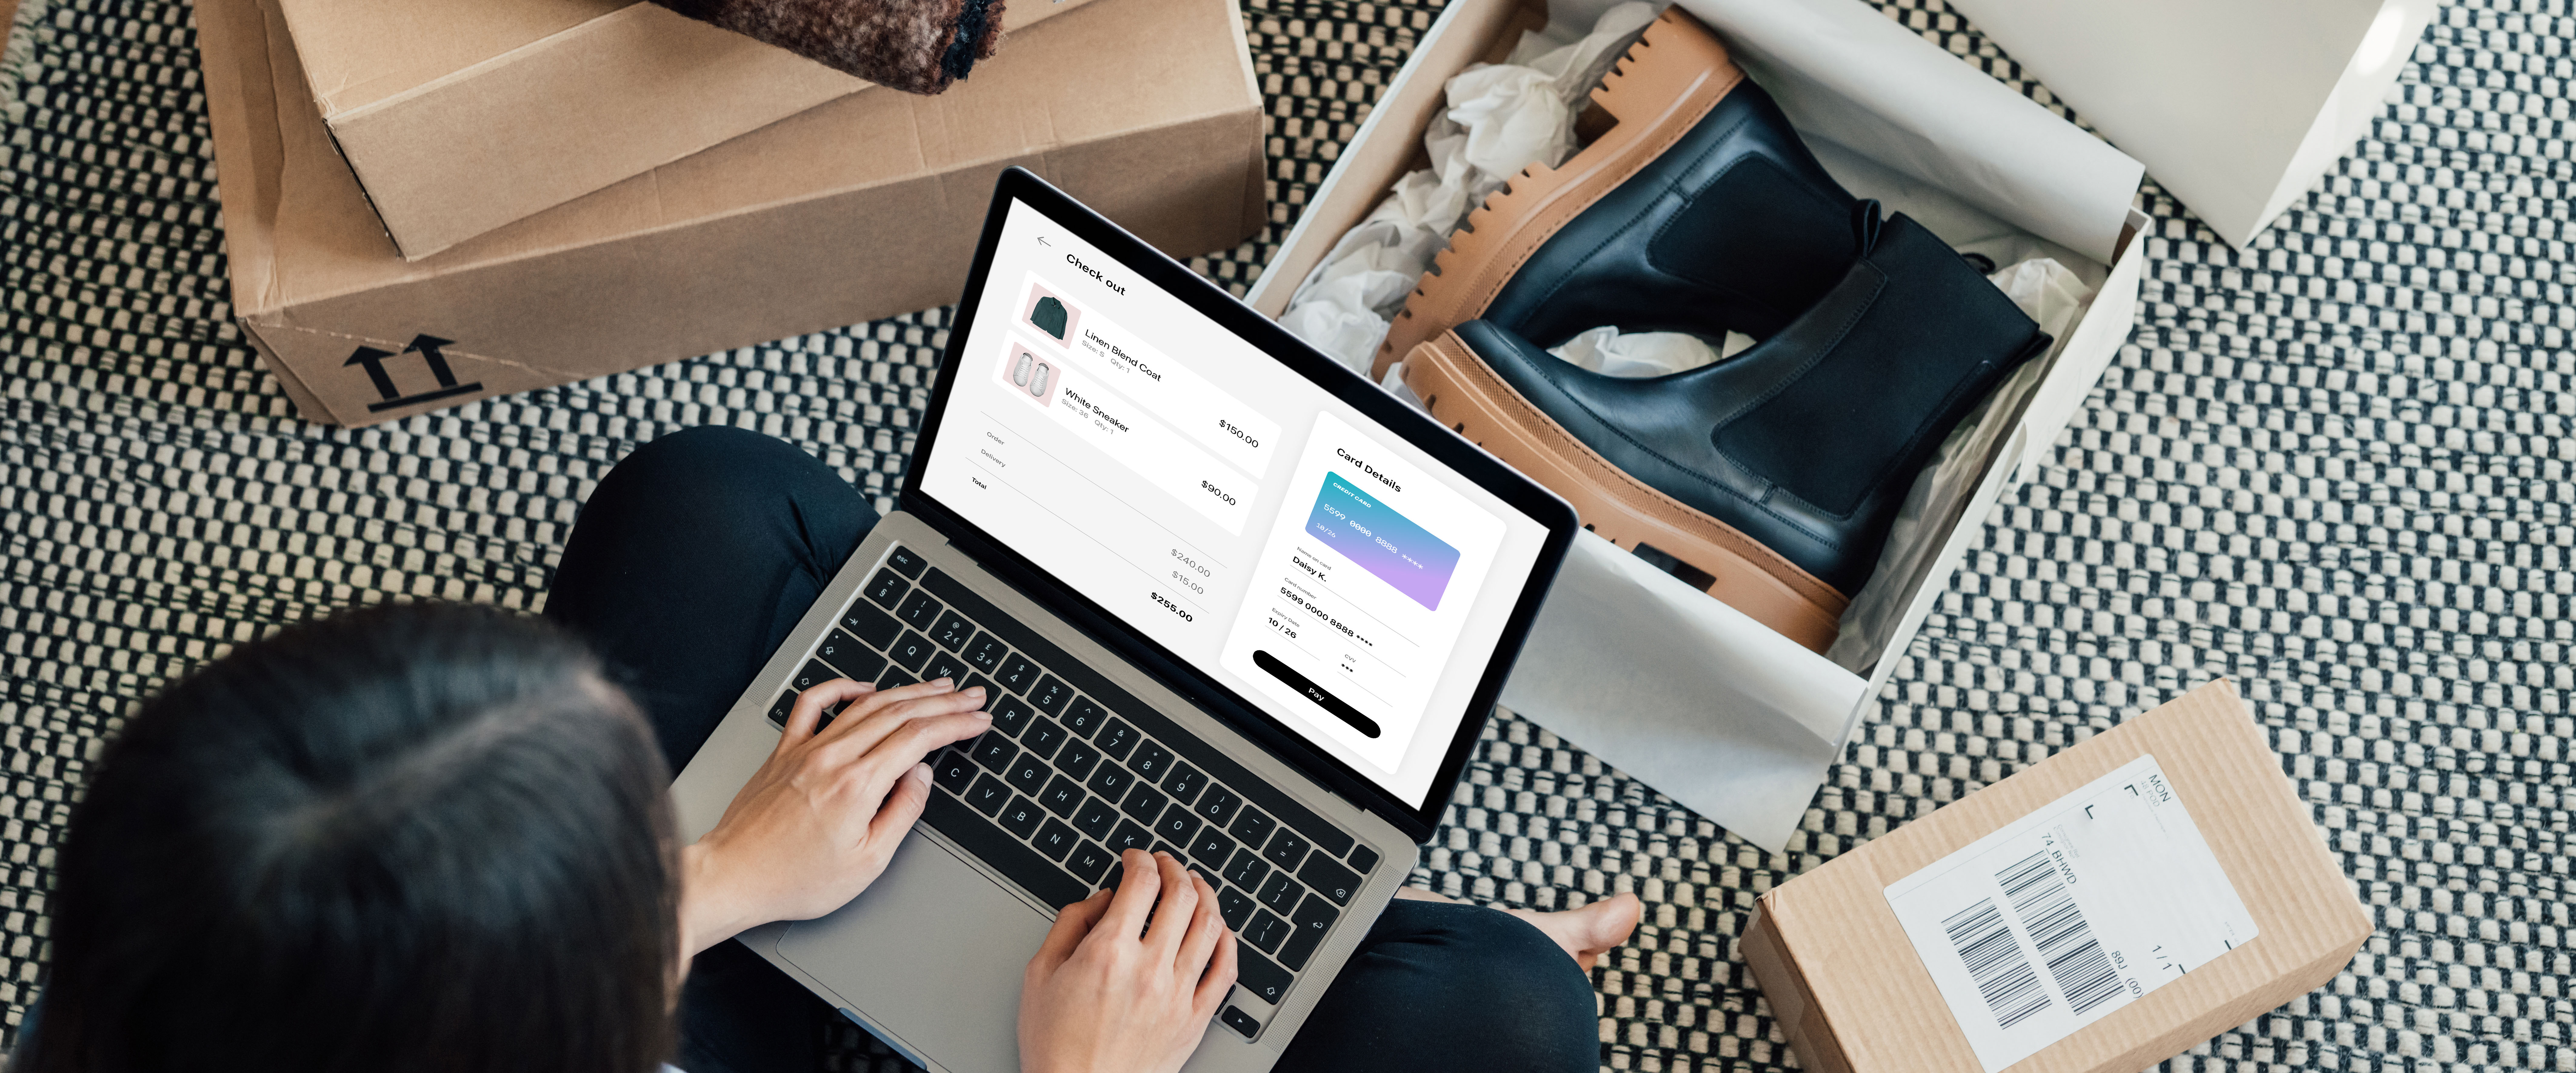 Image of a woman online shopping with a pair of boots in an open box in front of her.